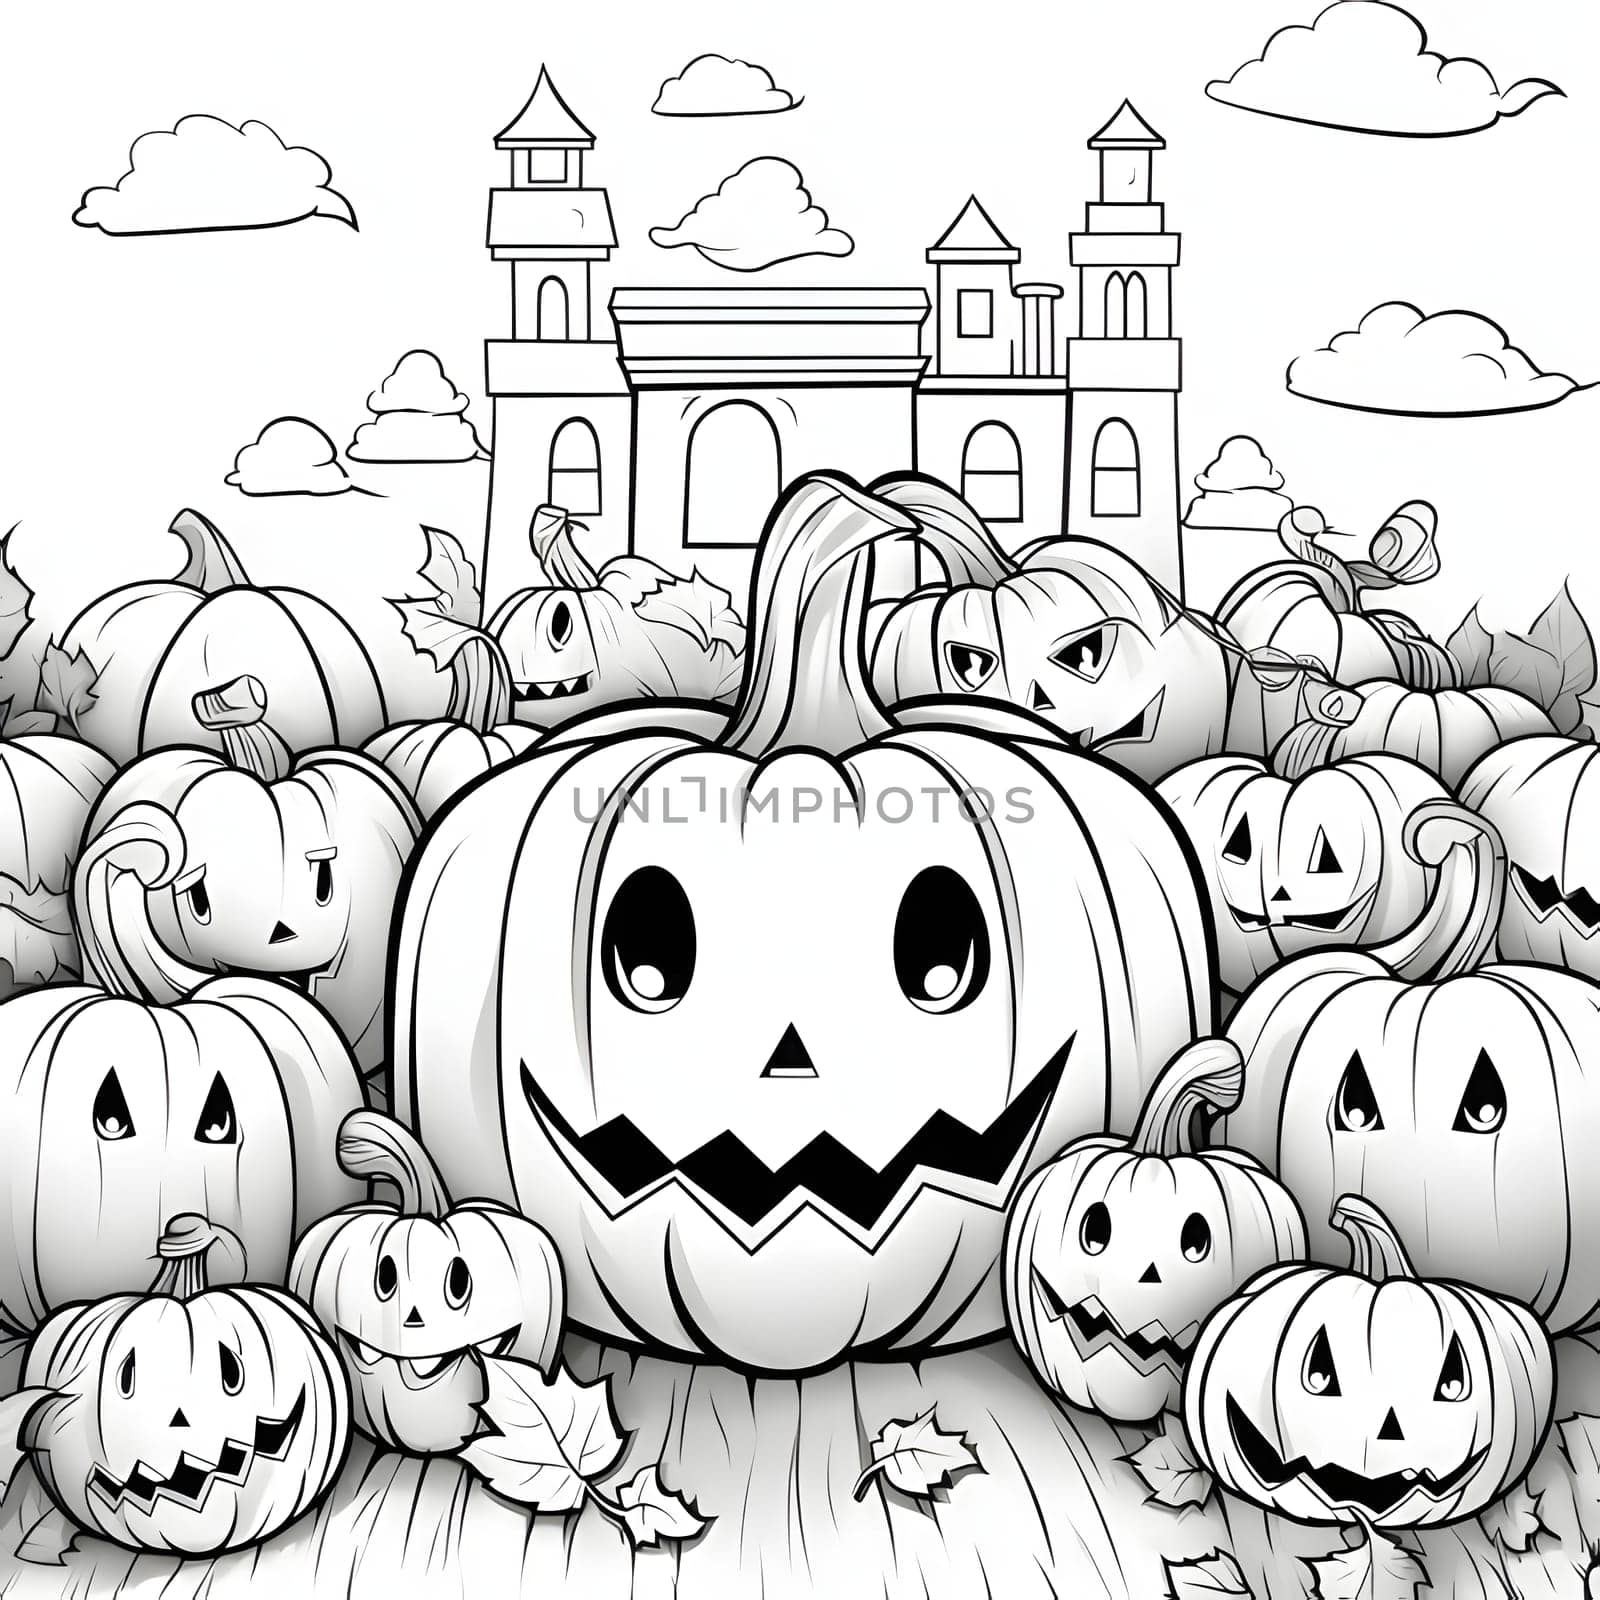 Large jack-o-lantern pumpkin, around smaller ones in the background building, Halloween black and white picture coloring book. Atmosphere of darkness and fear.